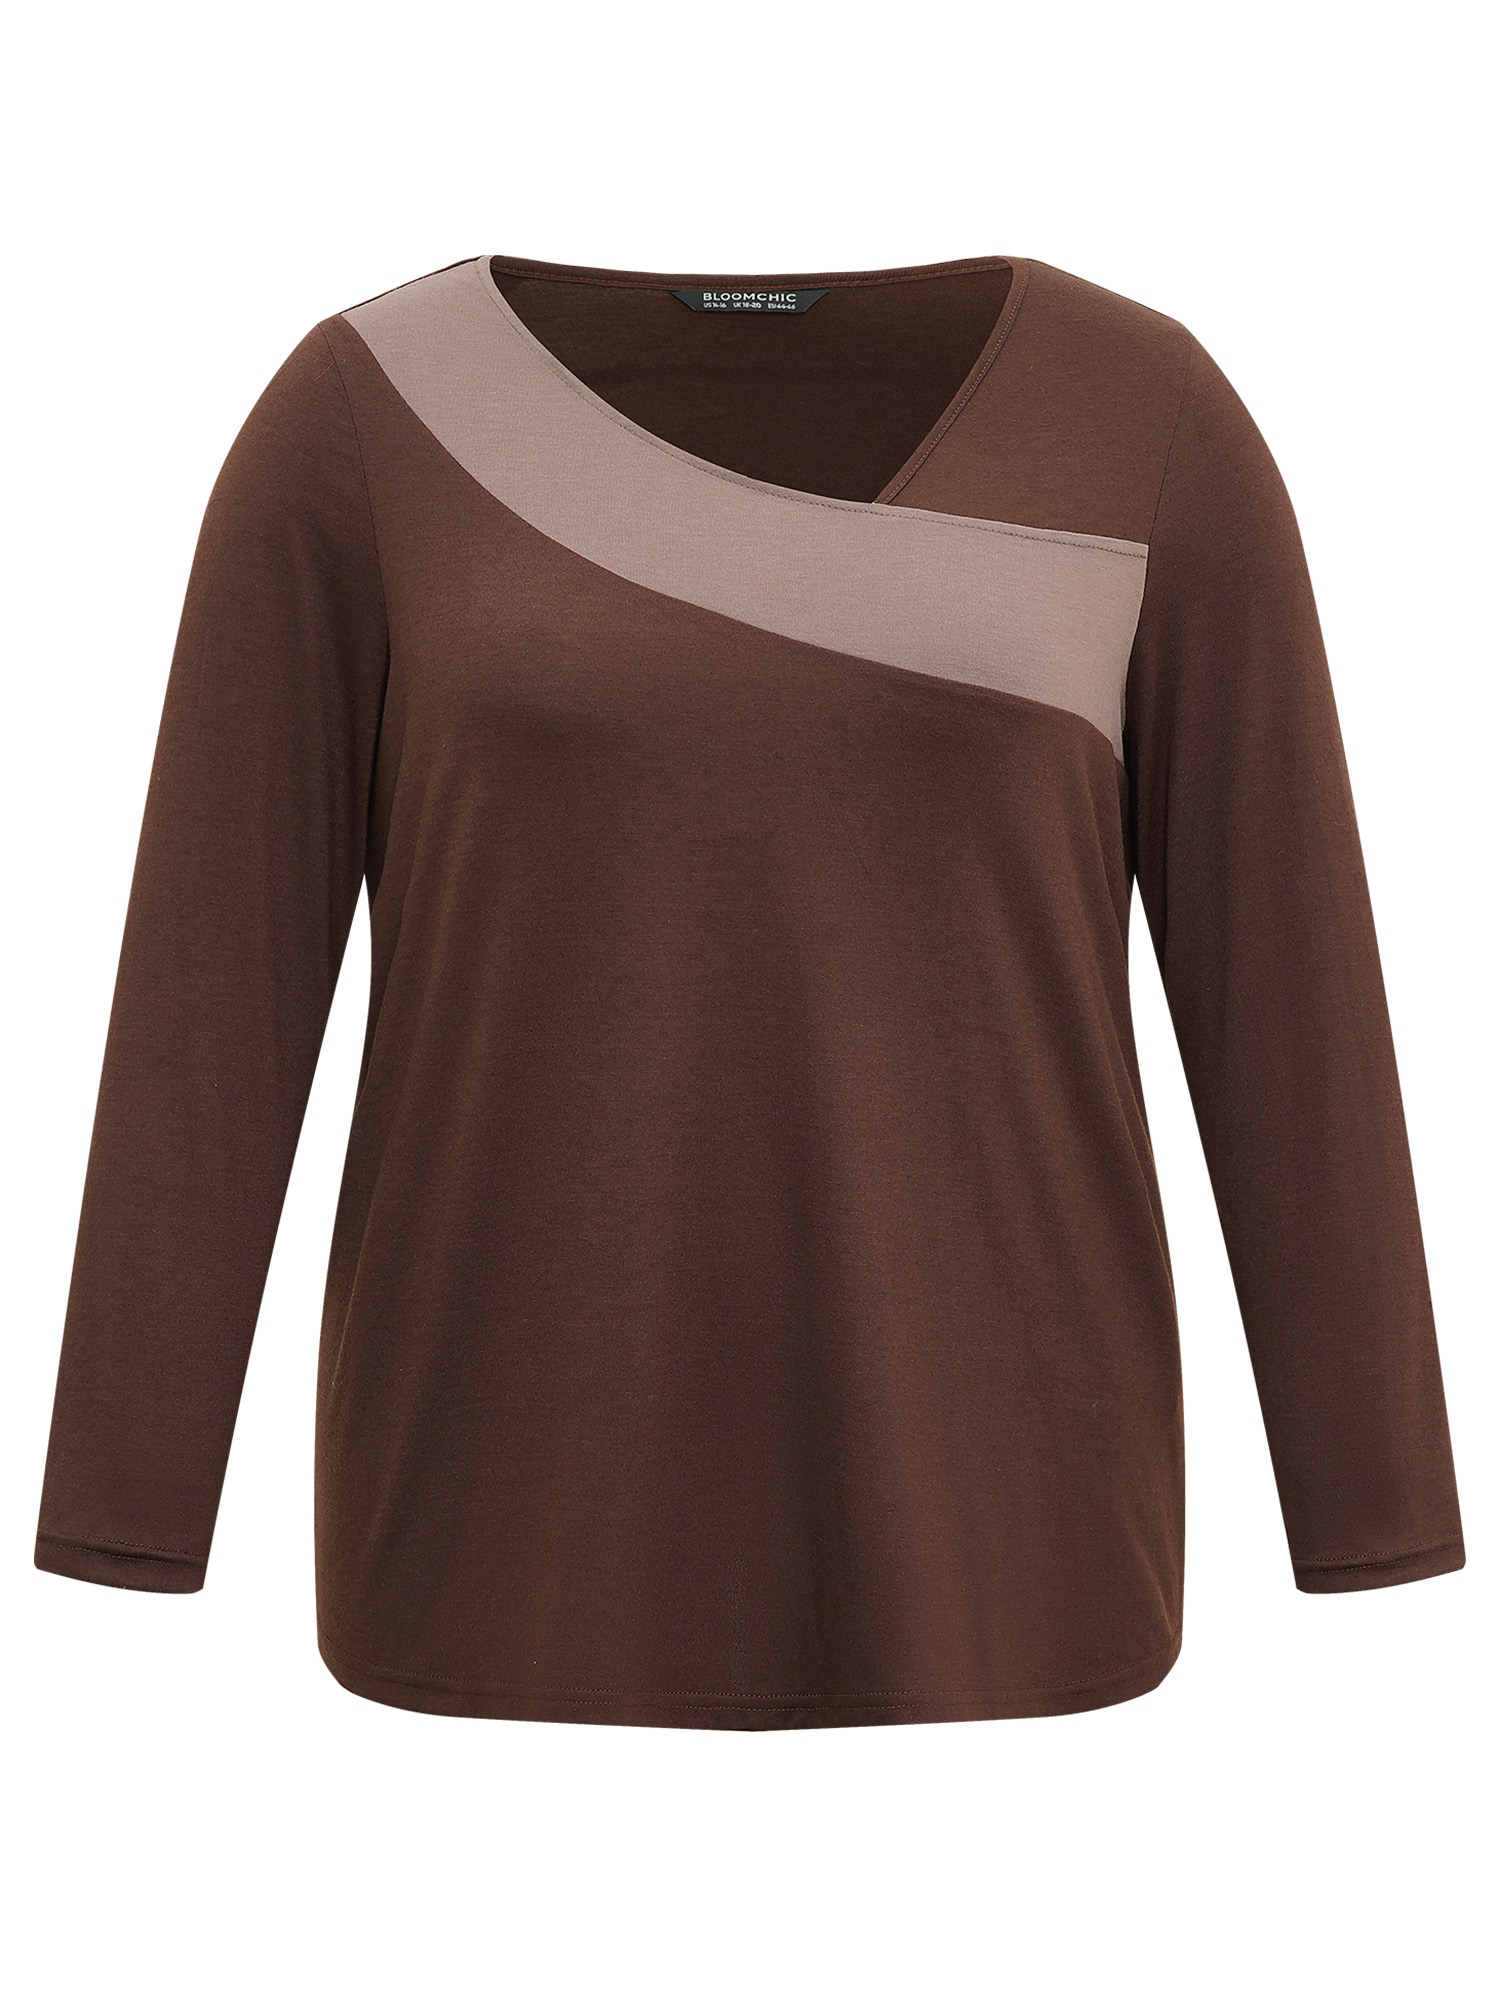 

Plus Size Contrast Patchwork Long Sleeve T-shirt DarkBrown Women Casual Contrast Plain V-neck Everyday T-shirts BloomChic